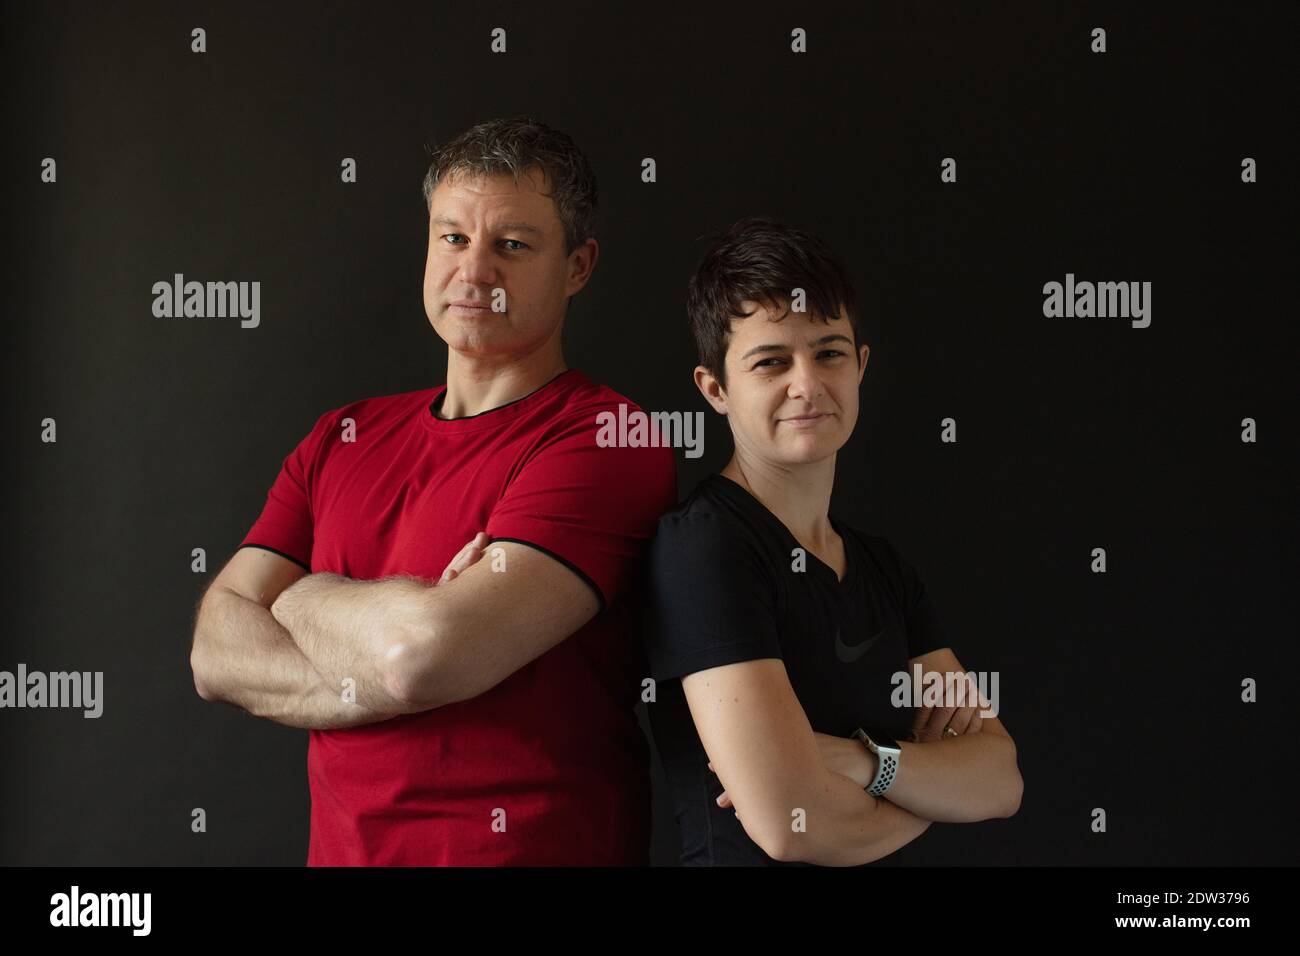 Caucasian athletic personal trainer couple dressed in red and in black posing back on back with crossed arms in front of a black background. Stock Photo